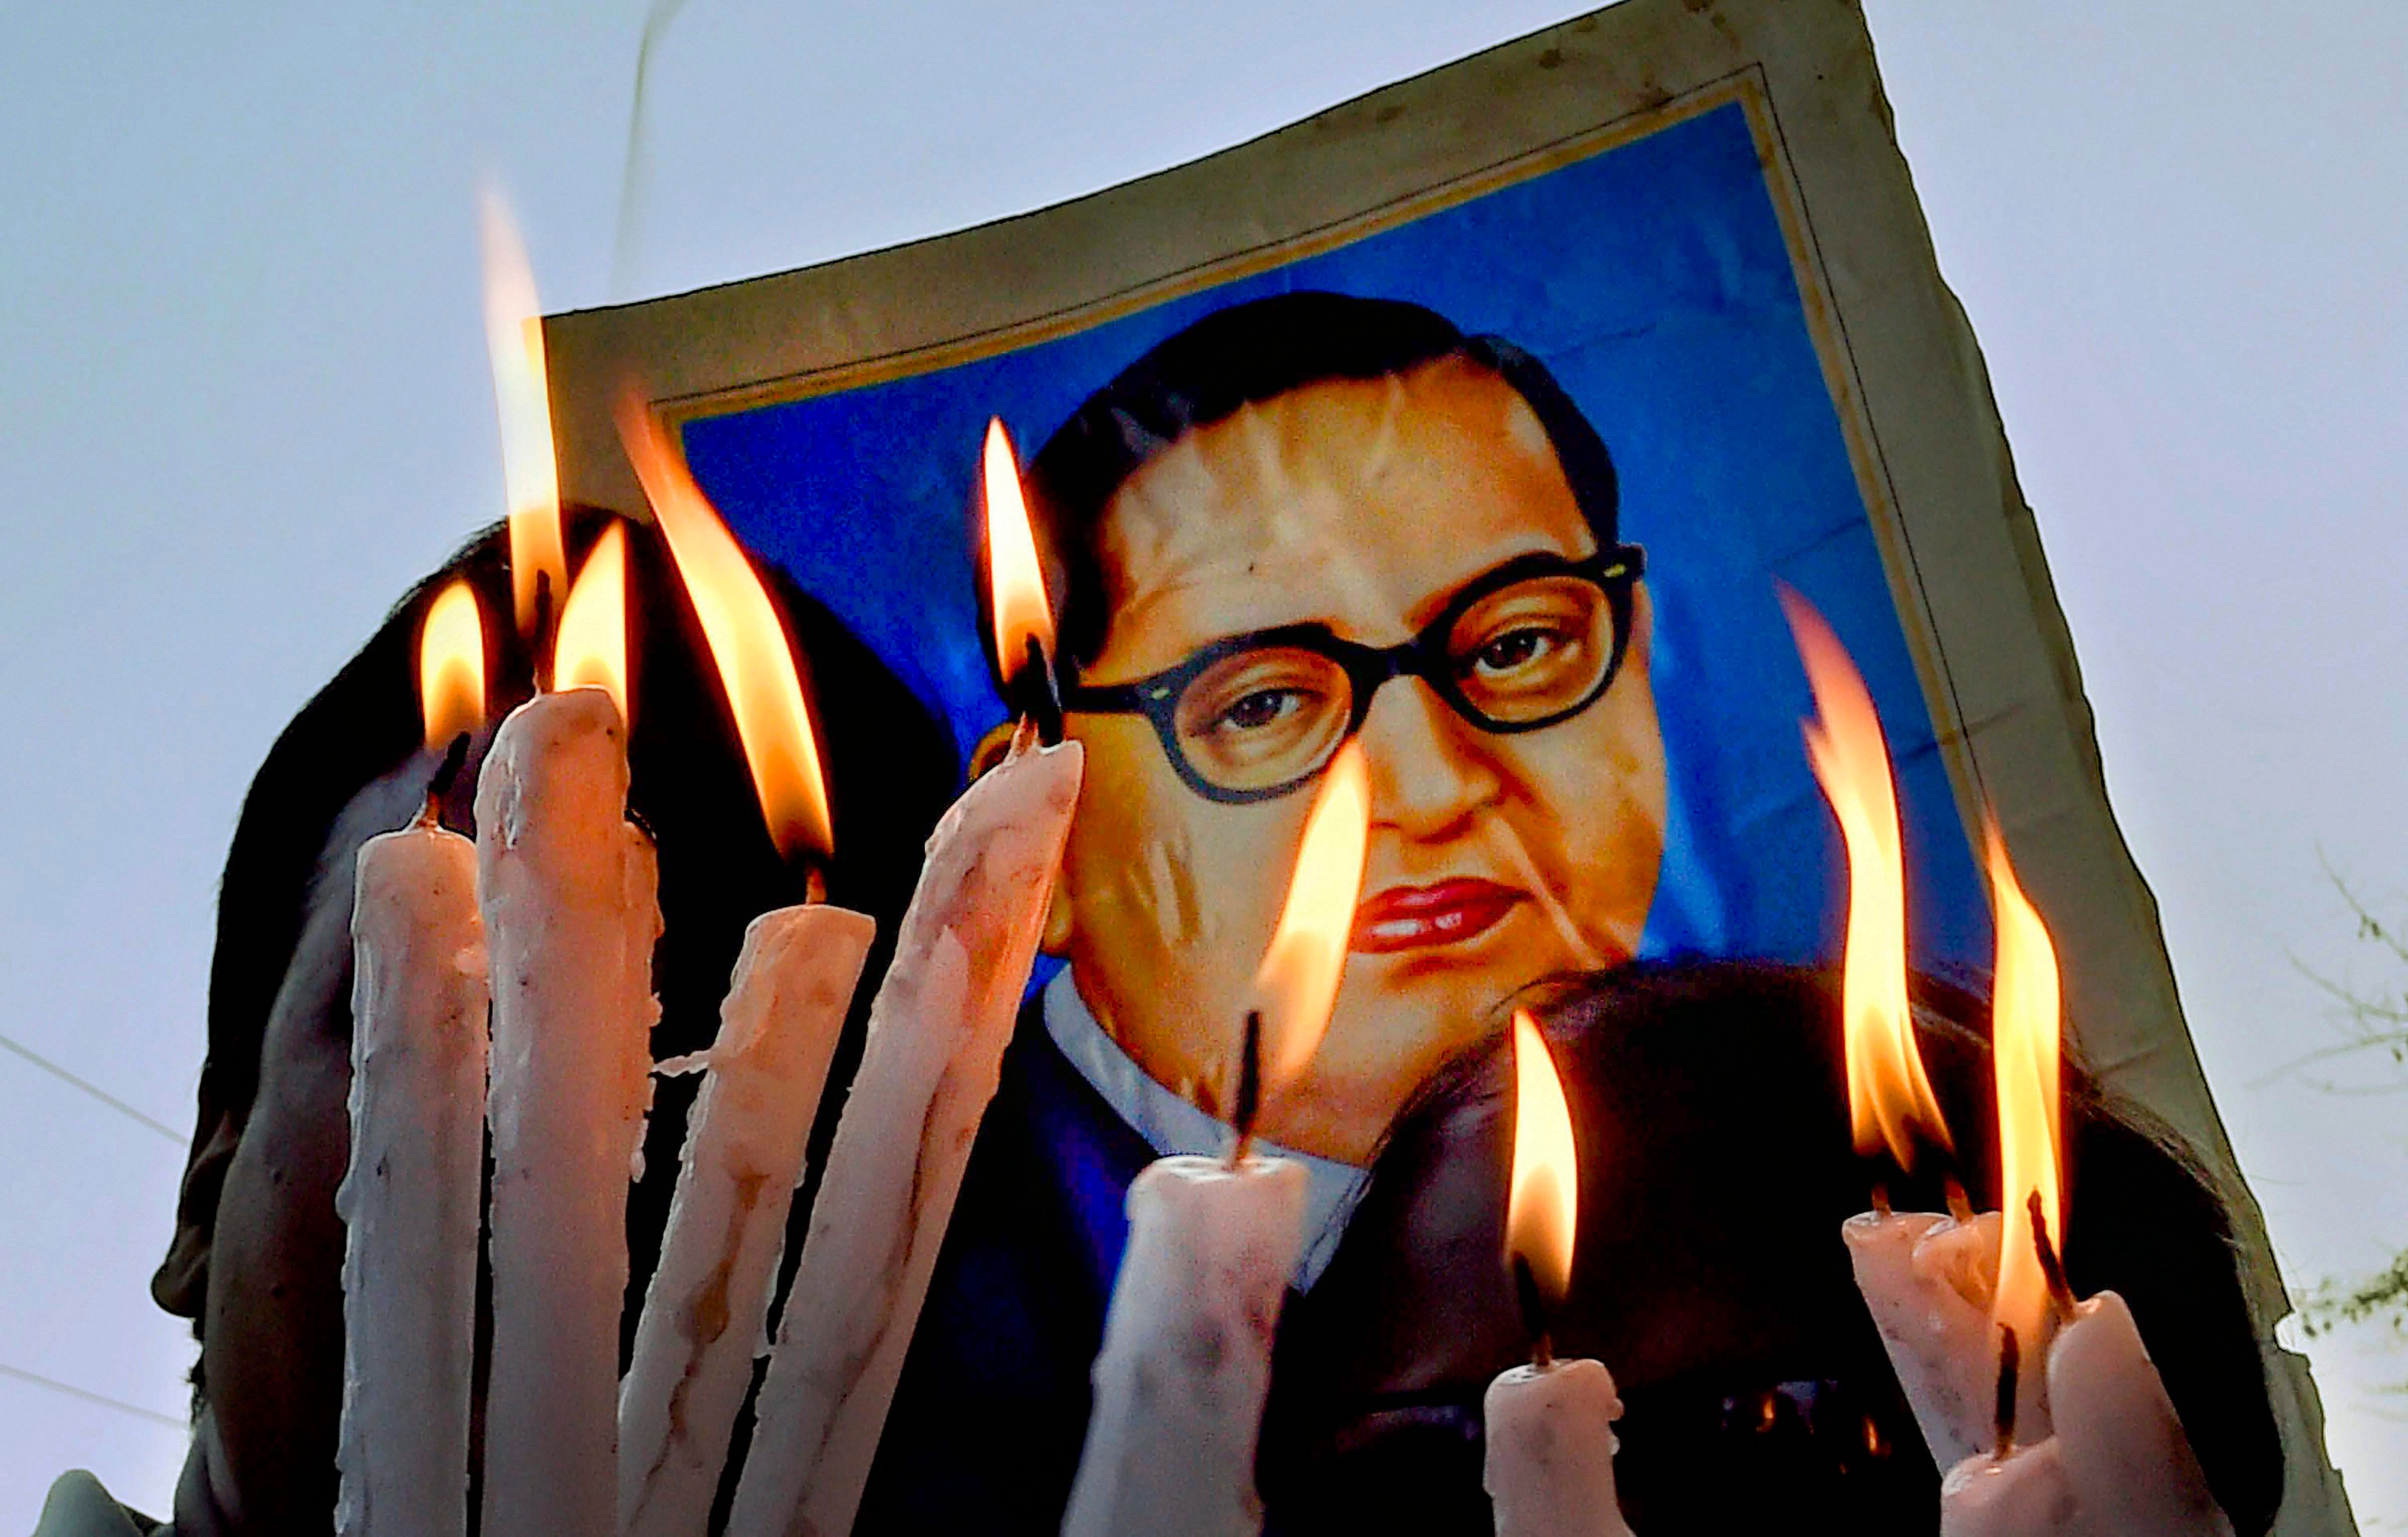 Dalit activists participate in a candlelight vigil to protest against Supreme Court's ruling on SC/ST Act, in Kolkata. PTI/Ashok Bhaumik